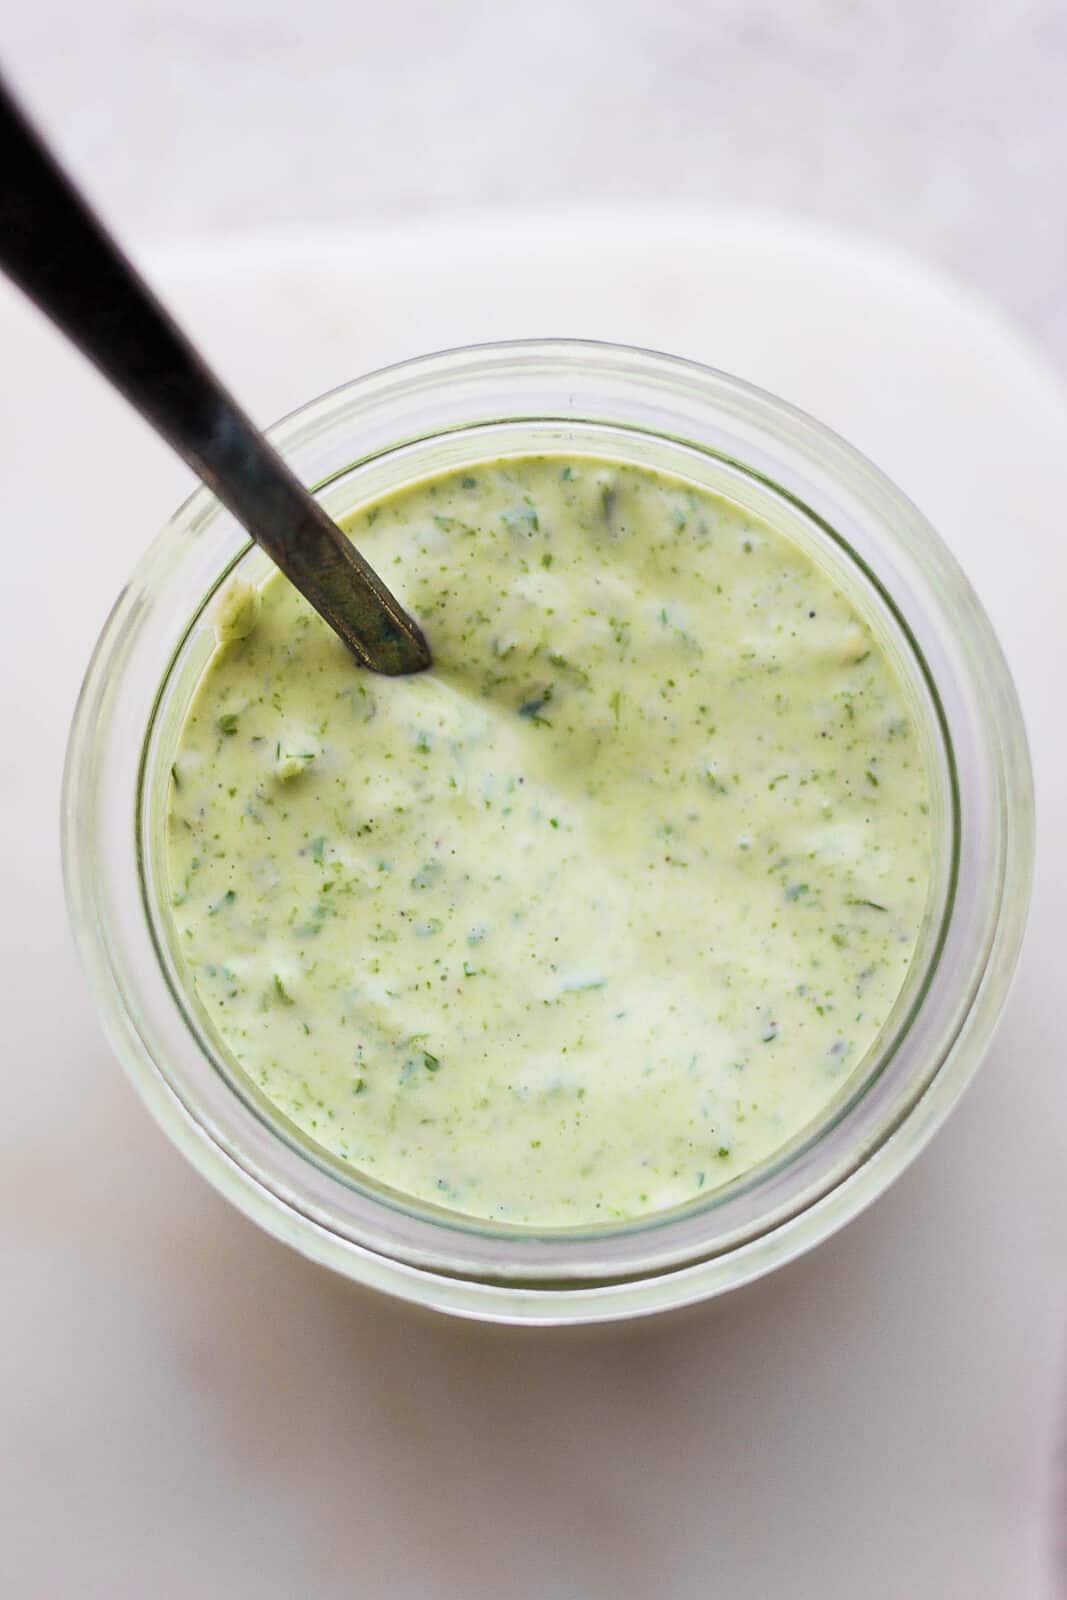 A jar of green goddess dressing with a spoon.